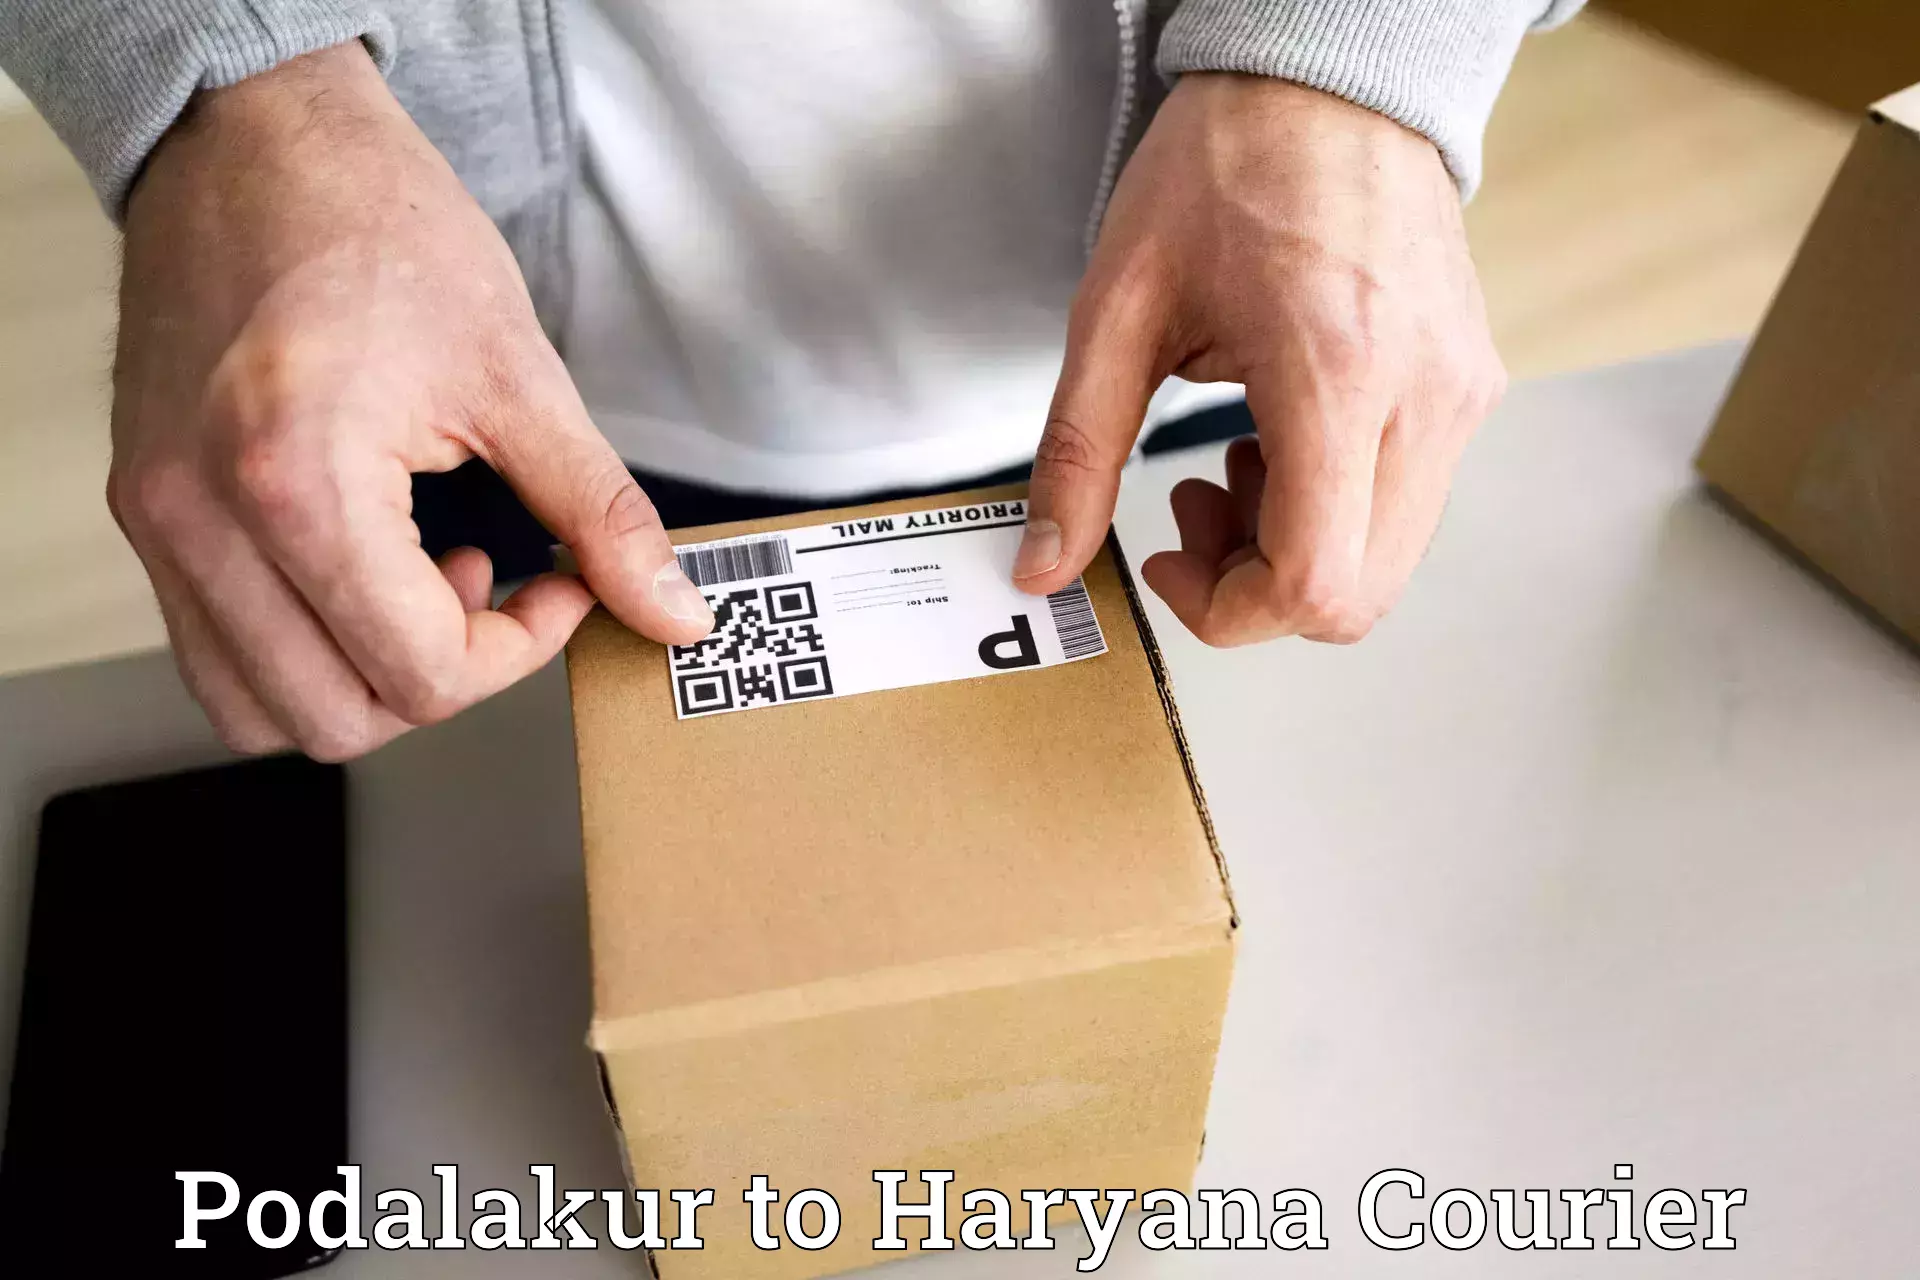 Global courier networks Podalakur to Chirya